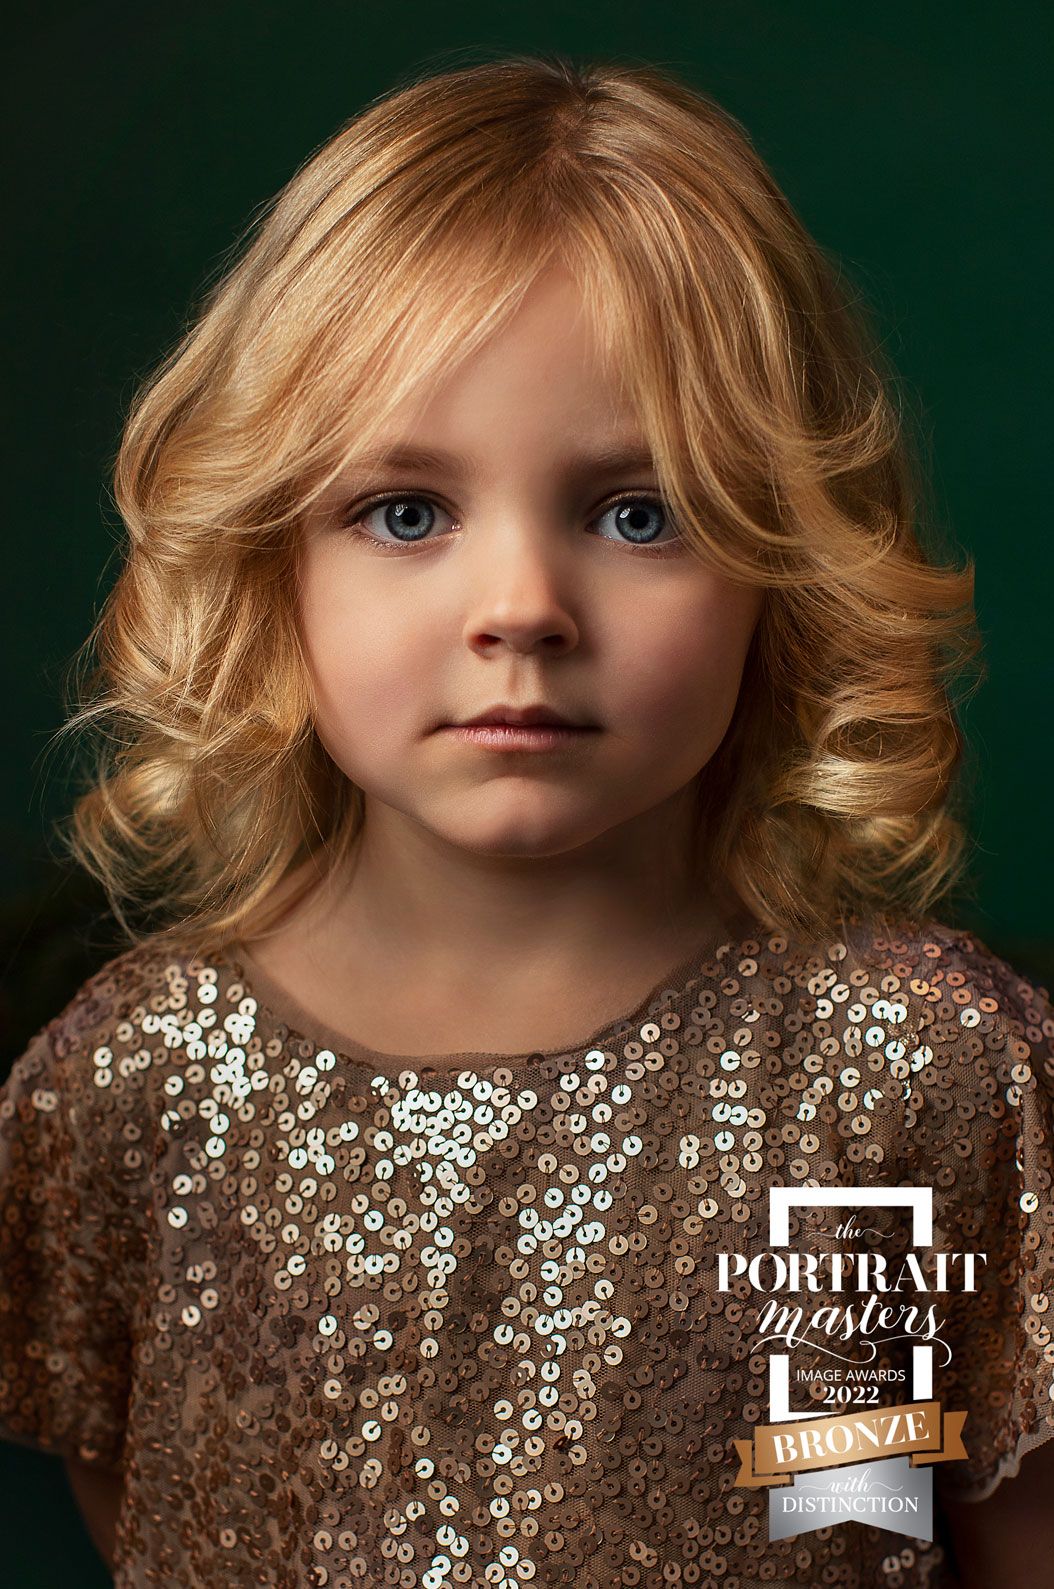 Photo of young blonde girl with curly hair and sparkly dress.